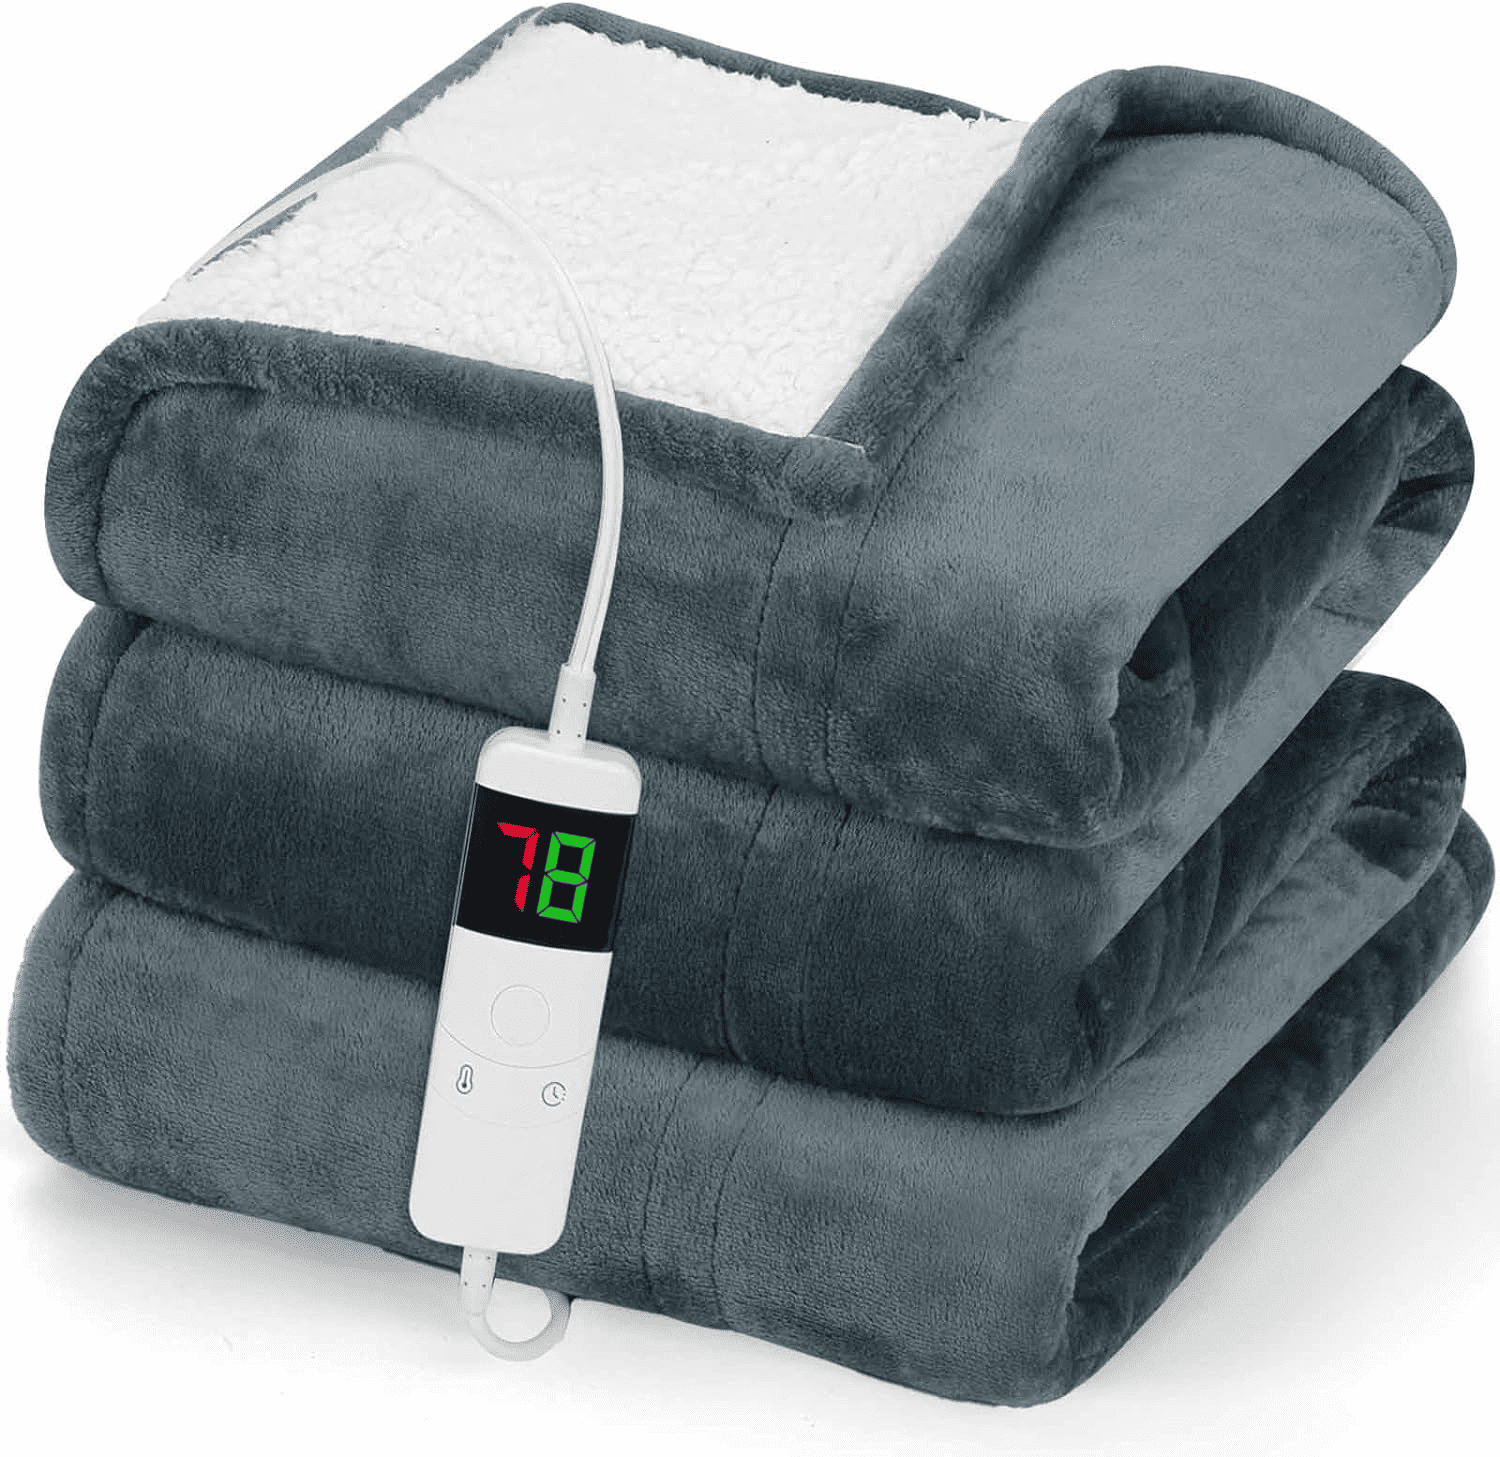 heated blanket, mattress pad replacement, 